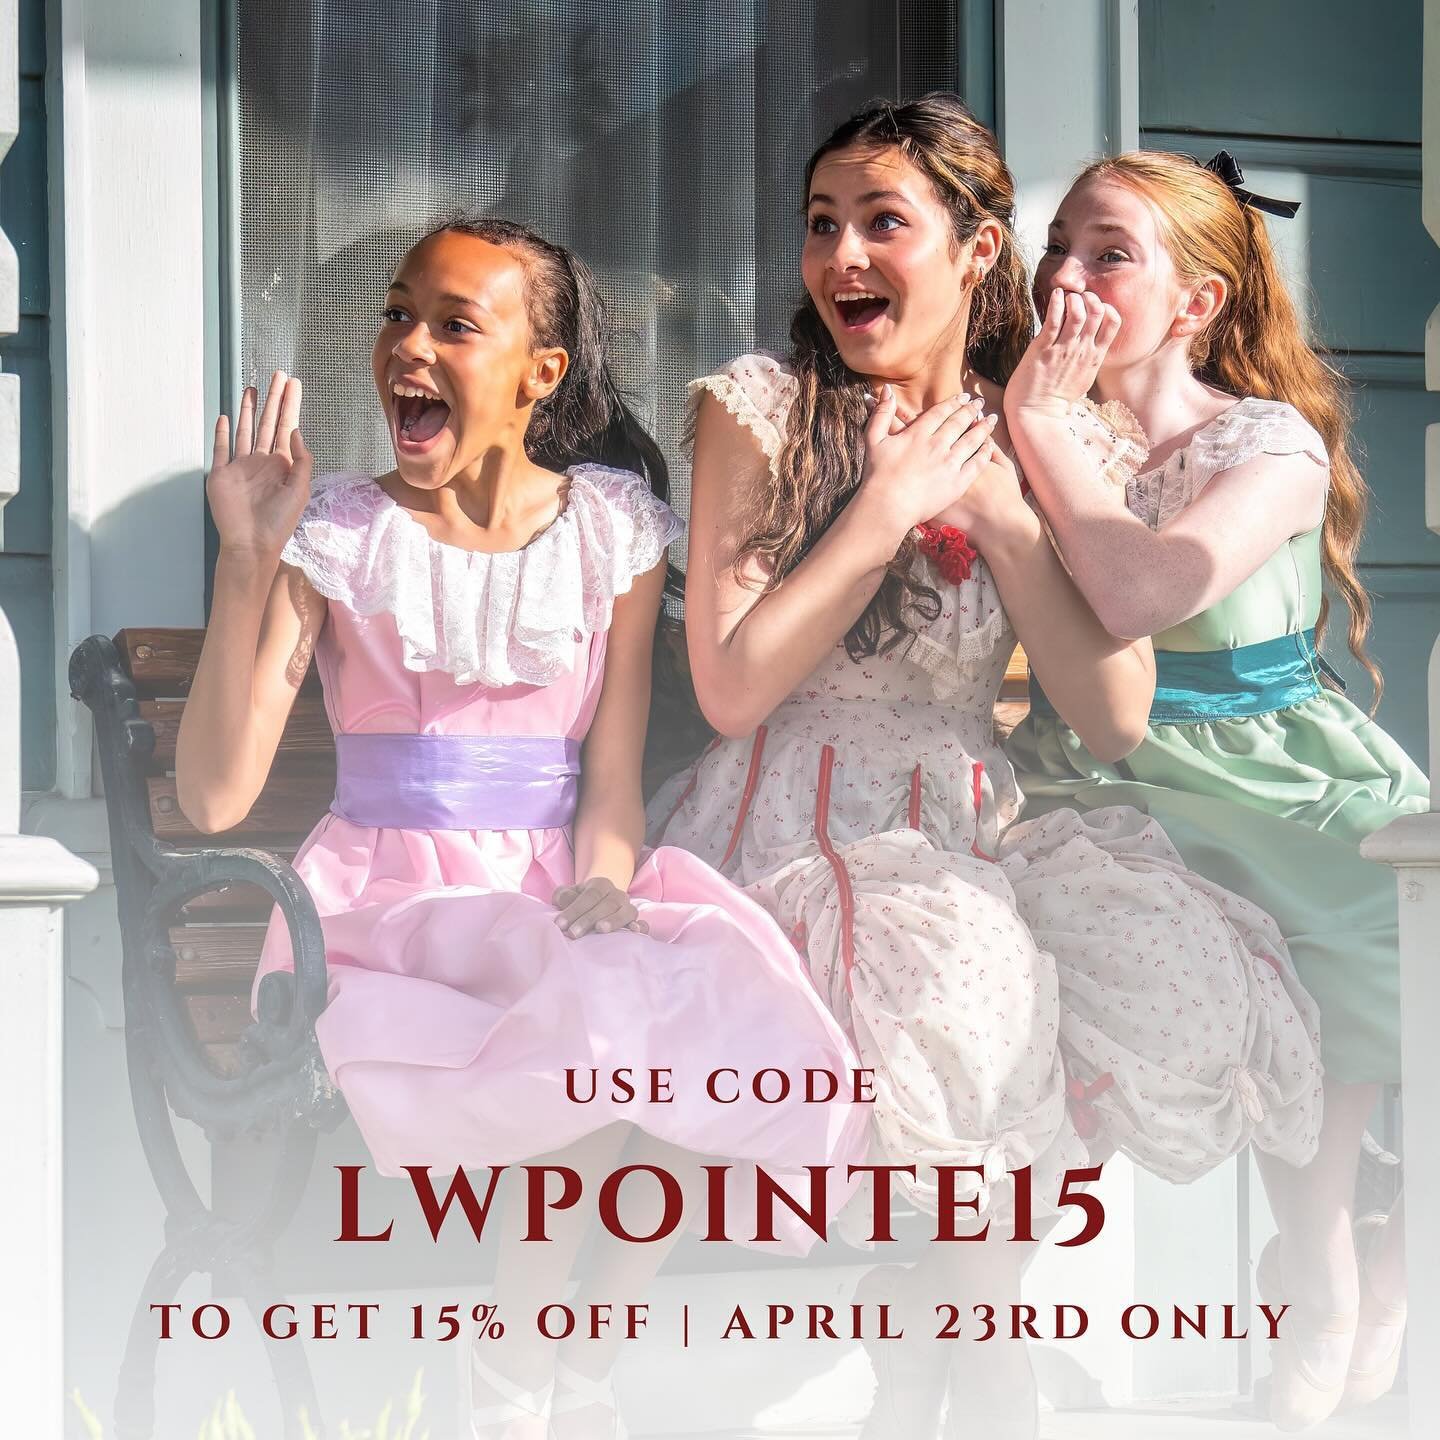 Have you heard??? 👩&zwj;👩&zwj;👧&zwj;👧✨

INTERNATIONAL POINTE SHOE DAY 🩰 is Tuesday, April 23rd! 

In honor of this very special day, we will be offering 15% OFF tickets to our Spring Immersive Experience 🌸 with code LWPOINTE15. This is a LIMITE